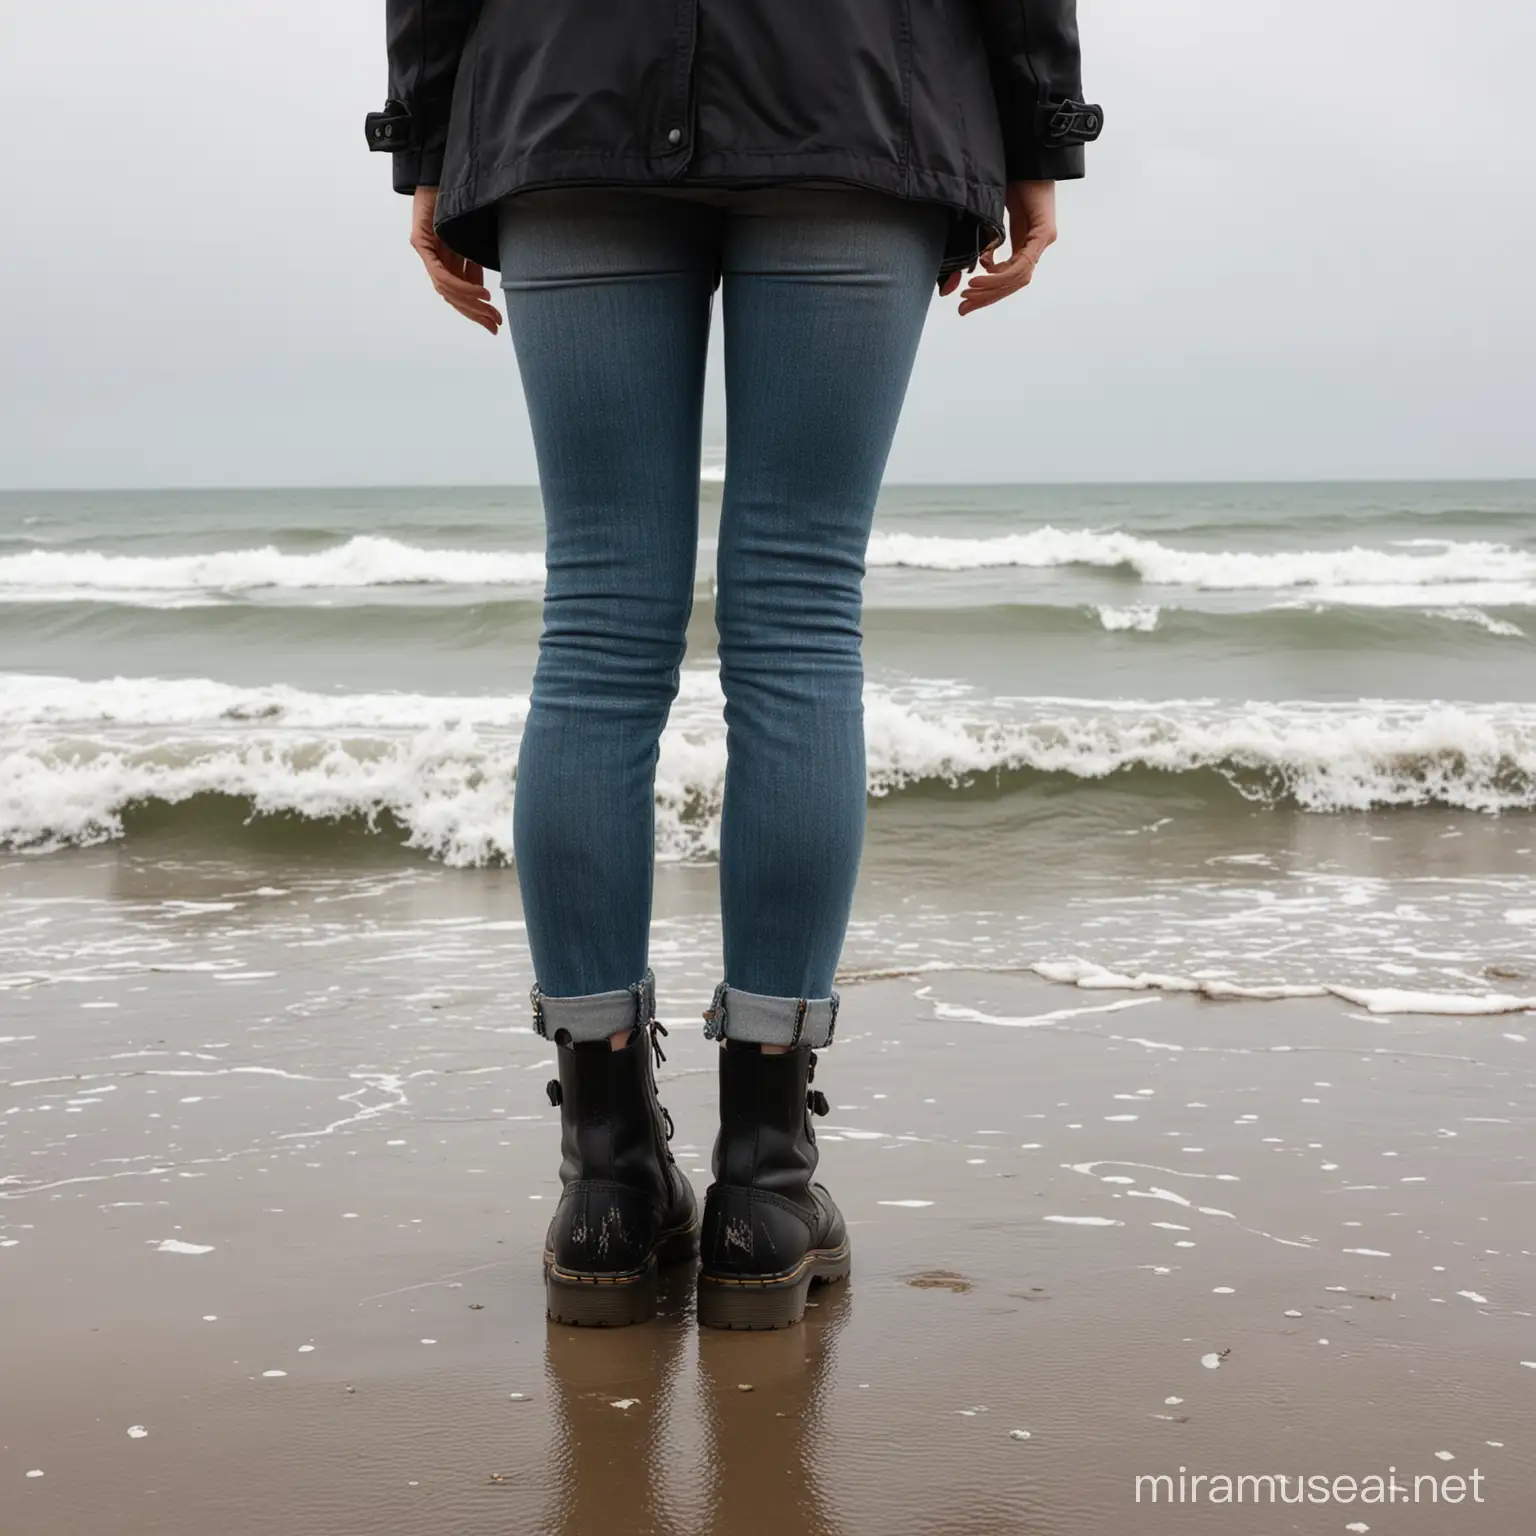 Woman in Black Coat and Boots Gazing at Ocean from Beach